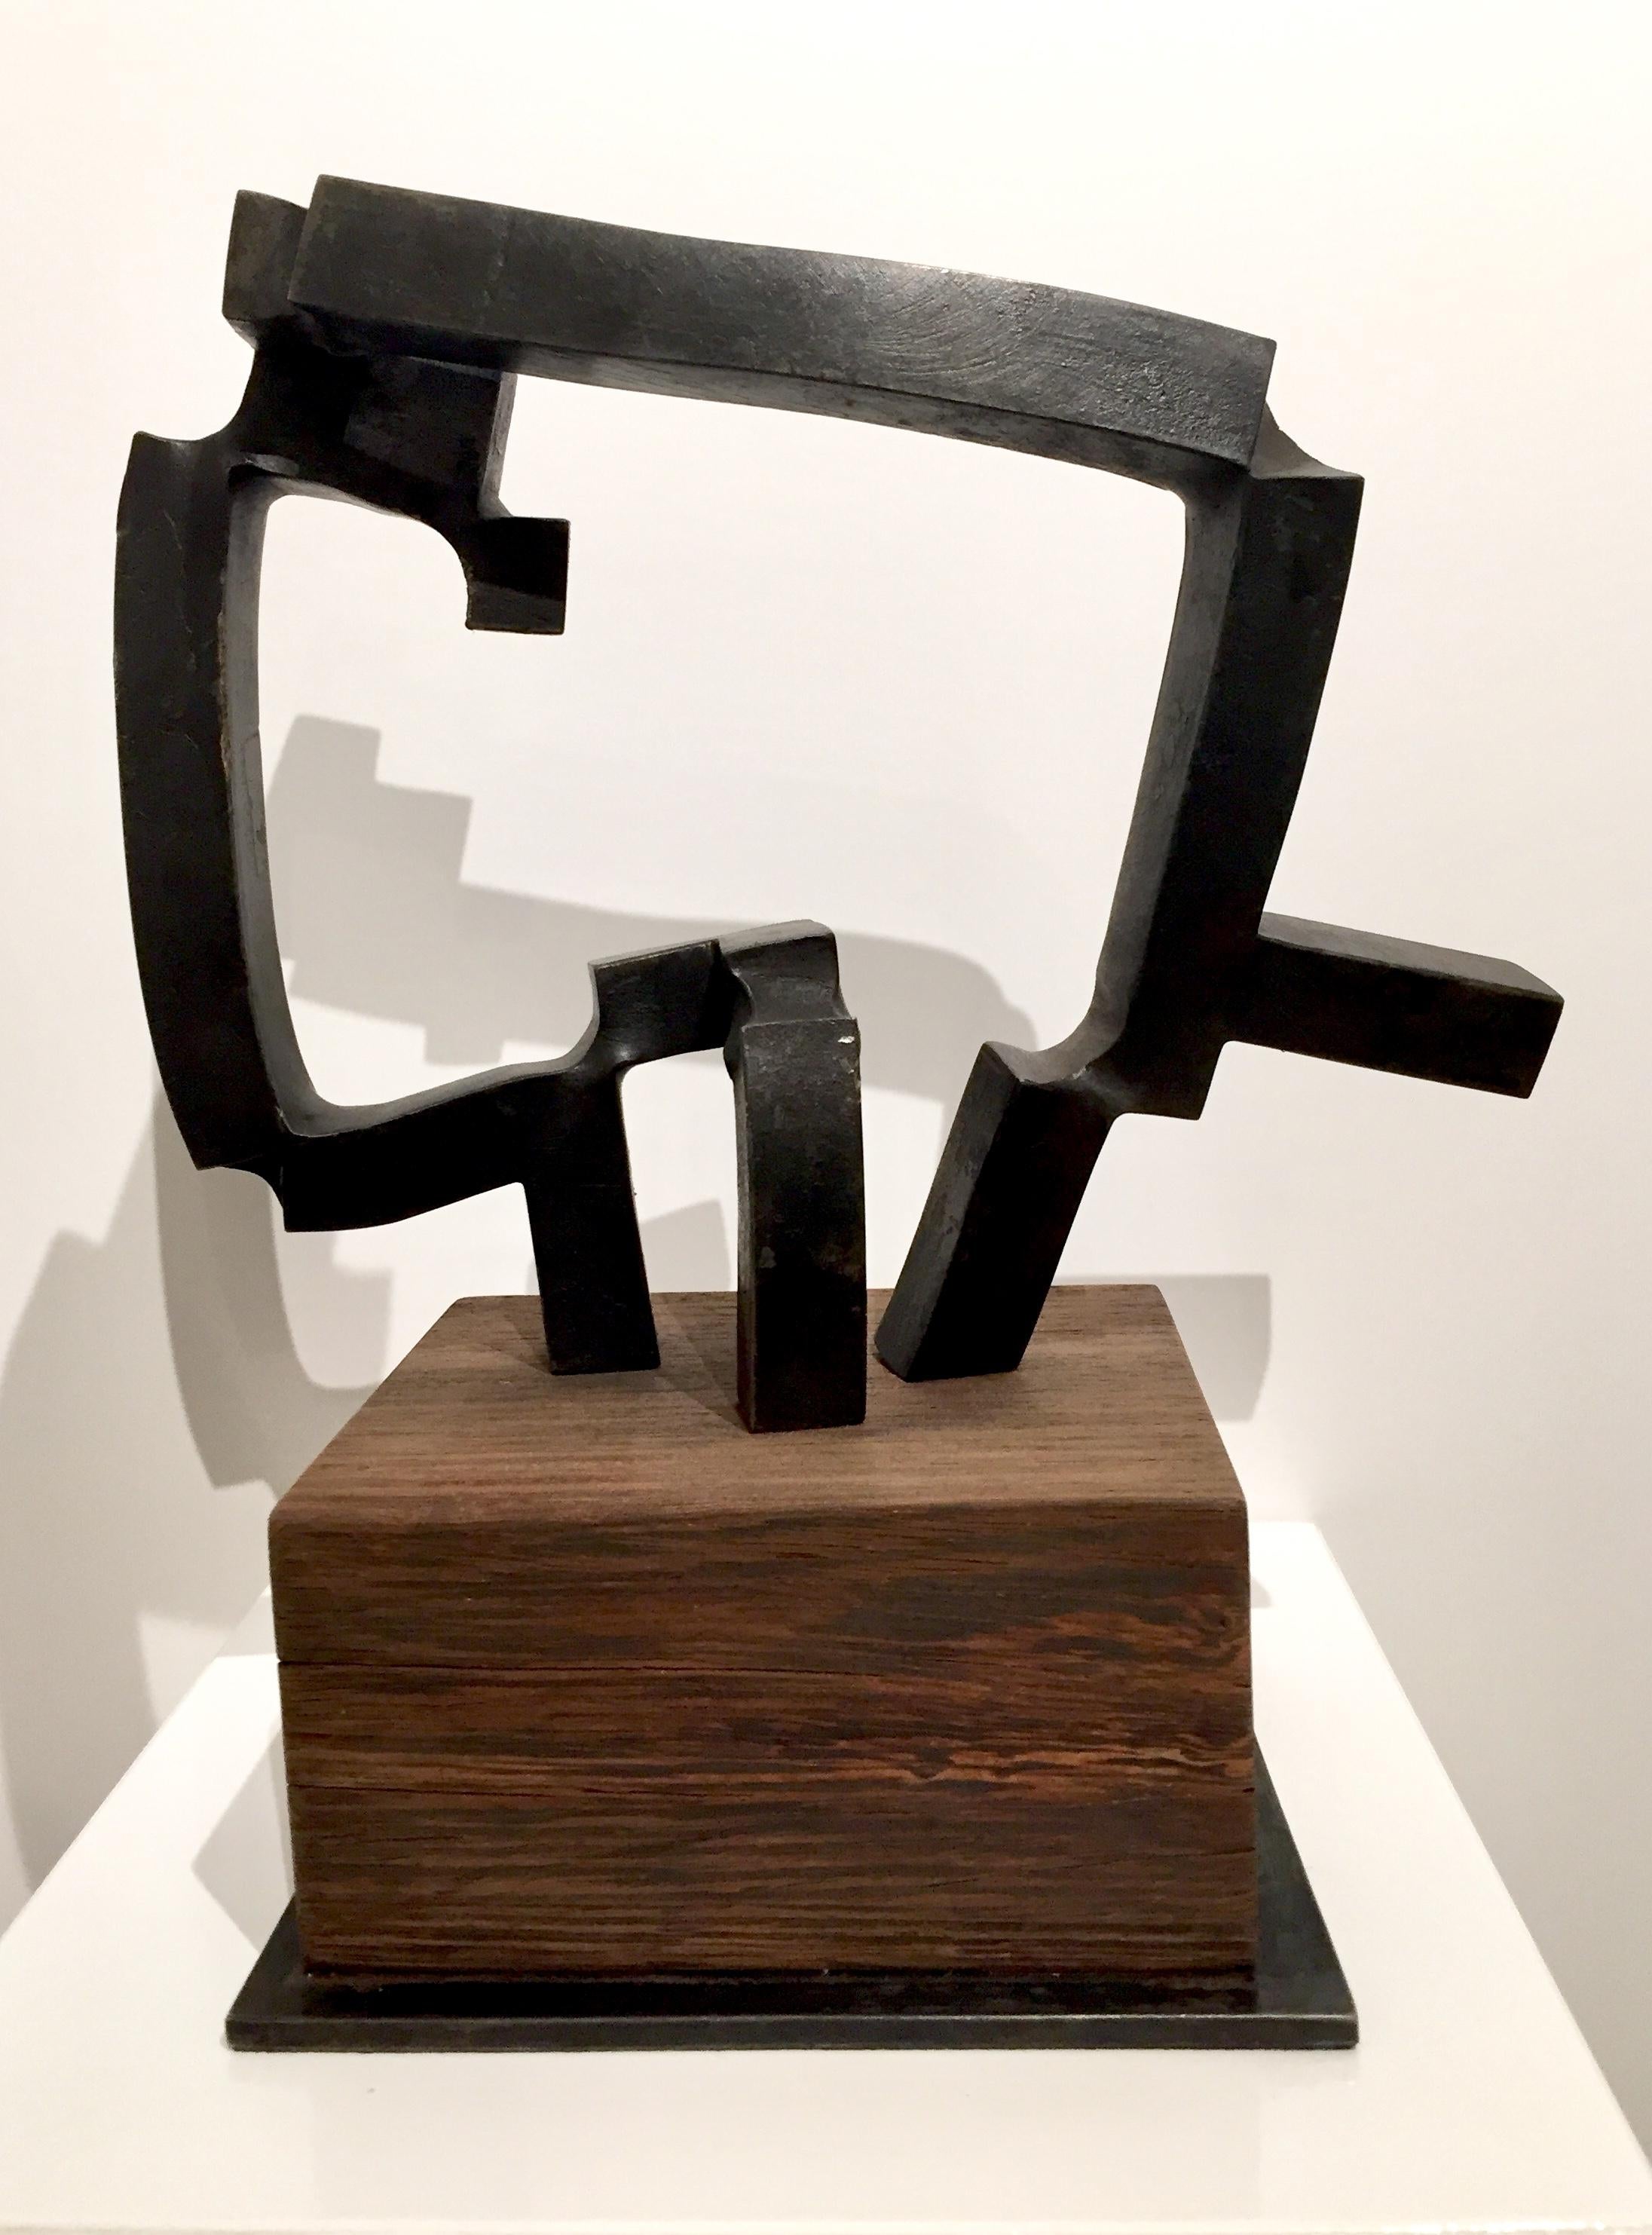 This is a 3 dimensional sculpture by Spanish abstract expressionist, Carlos Albert in dark gray forged steel on a dark brown natural wood base. 

Carlos Albert is a graduate of the School of Fine Arts at the Universidad de Complutense in Madrid,